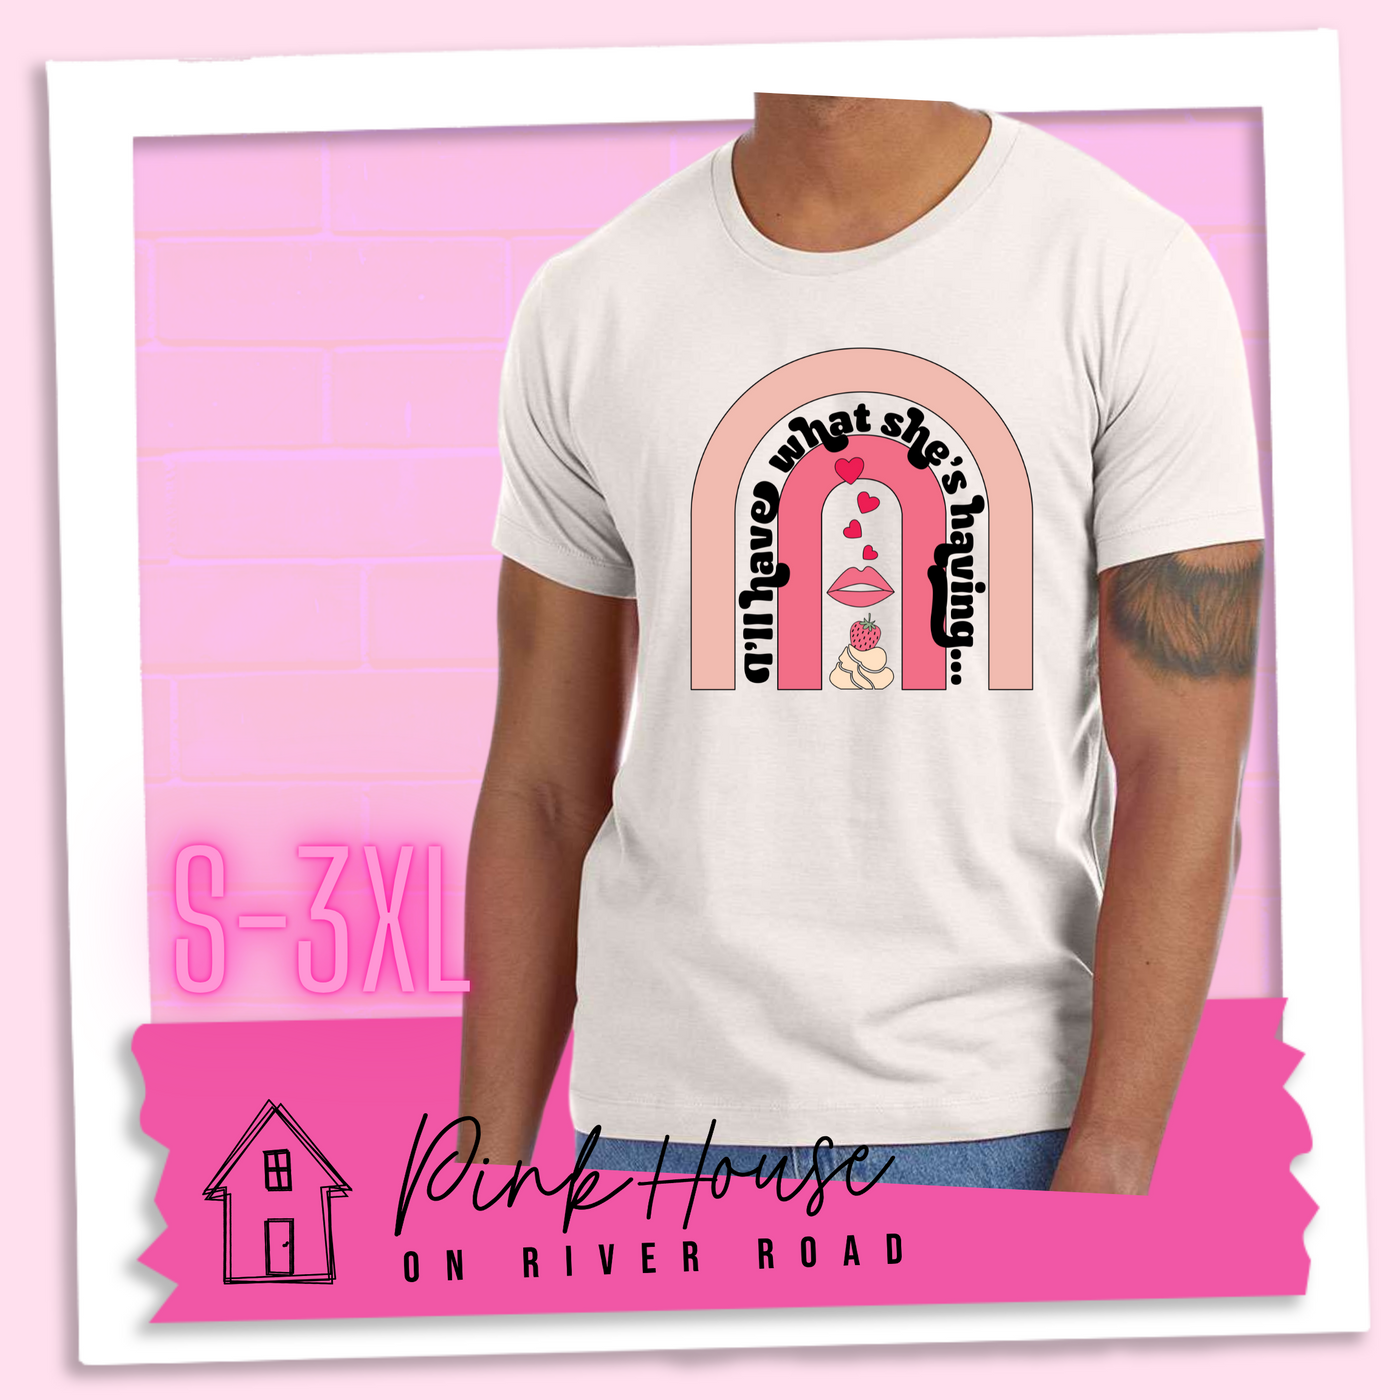 Dust tee with a graphic of a strawberry dessert and a set of lips with hearts, there is a pink arch going over the art. There is a retro font arched over the pink art that says "I'll have what she's having..." in black with another arch above that in light pink.